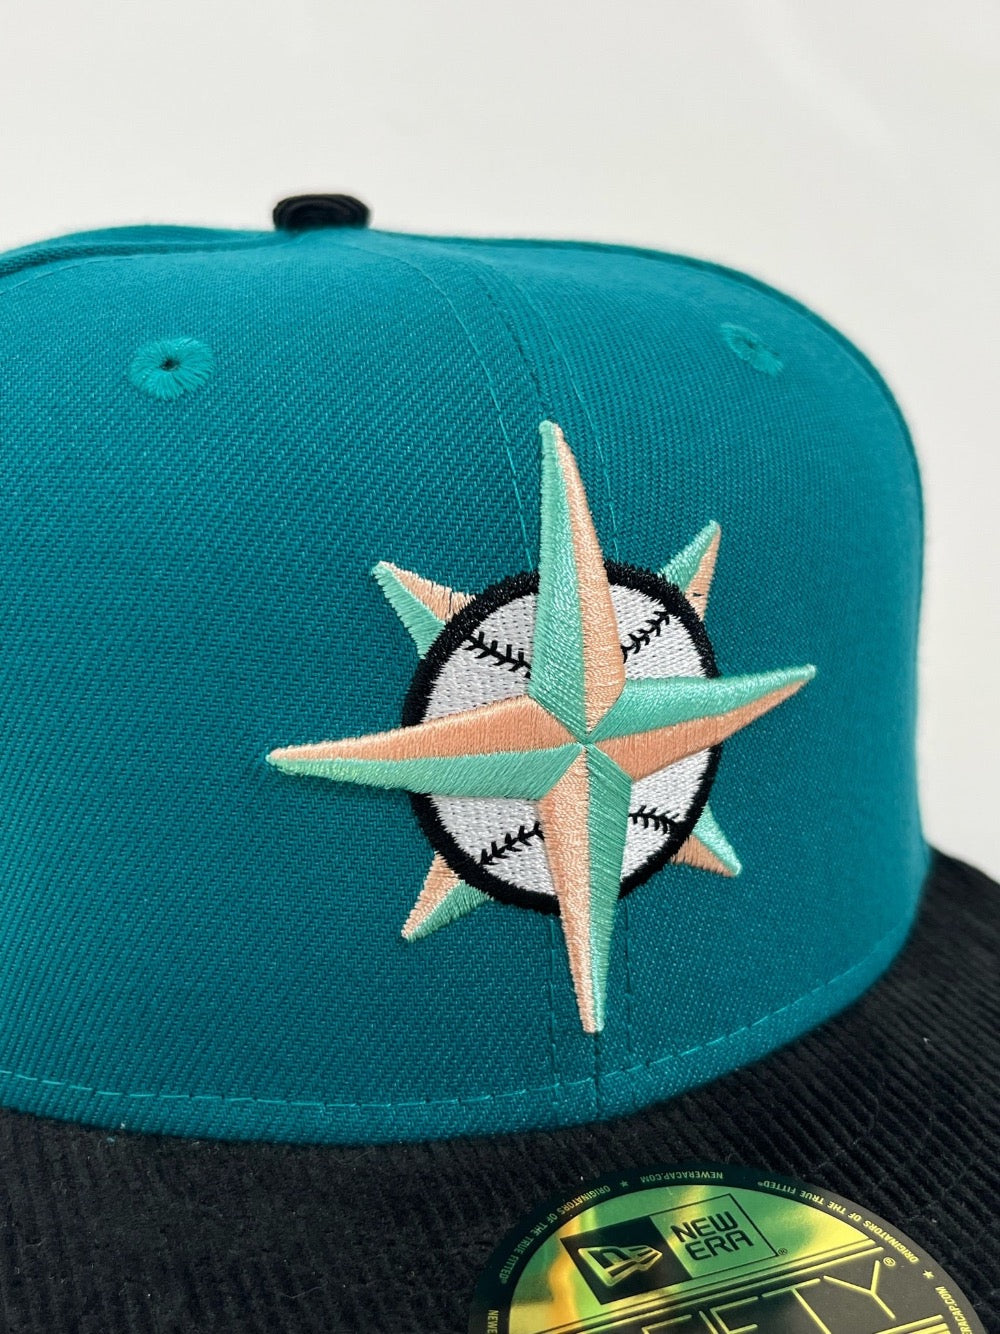 seattle mariners hat